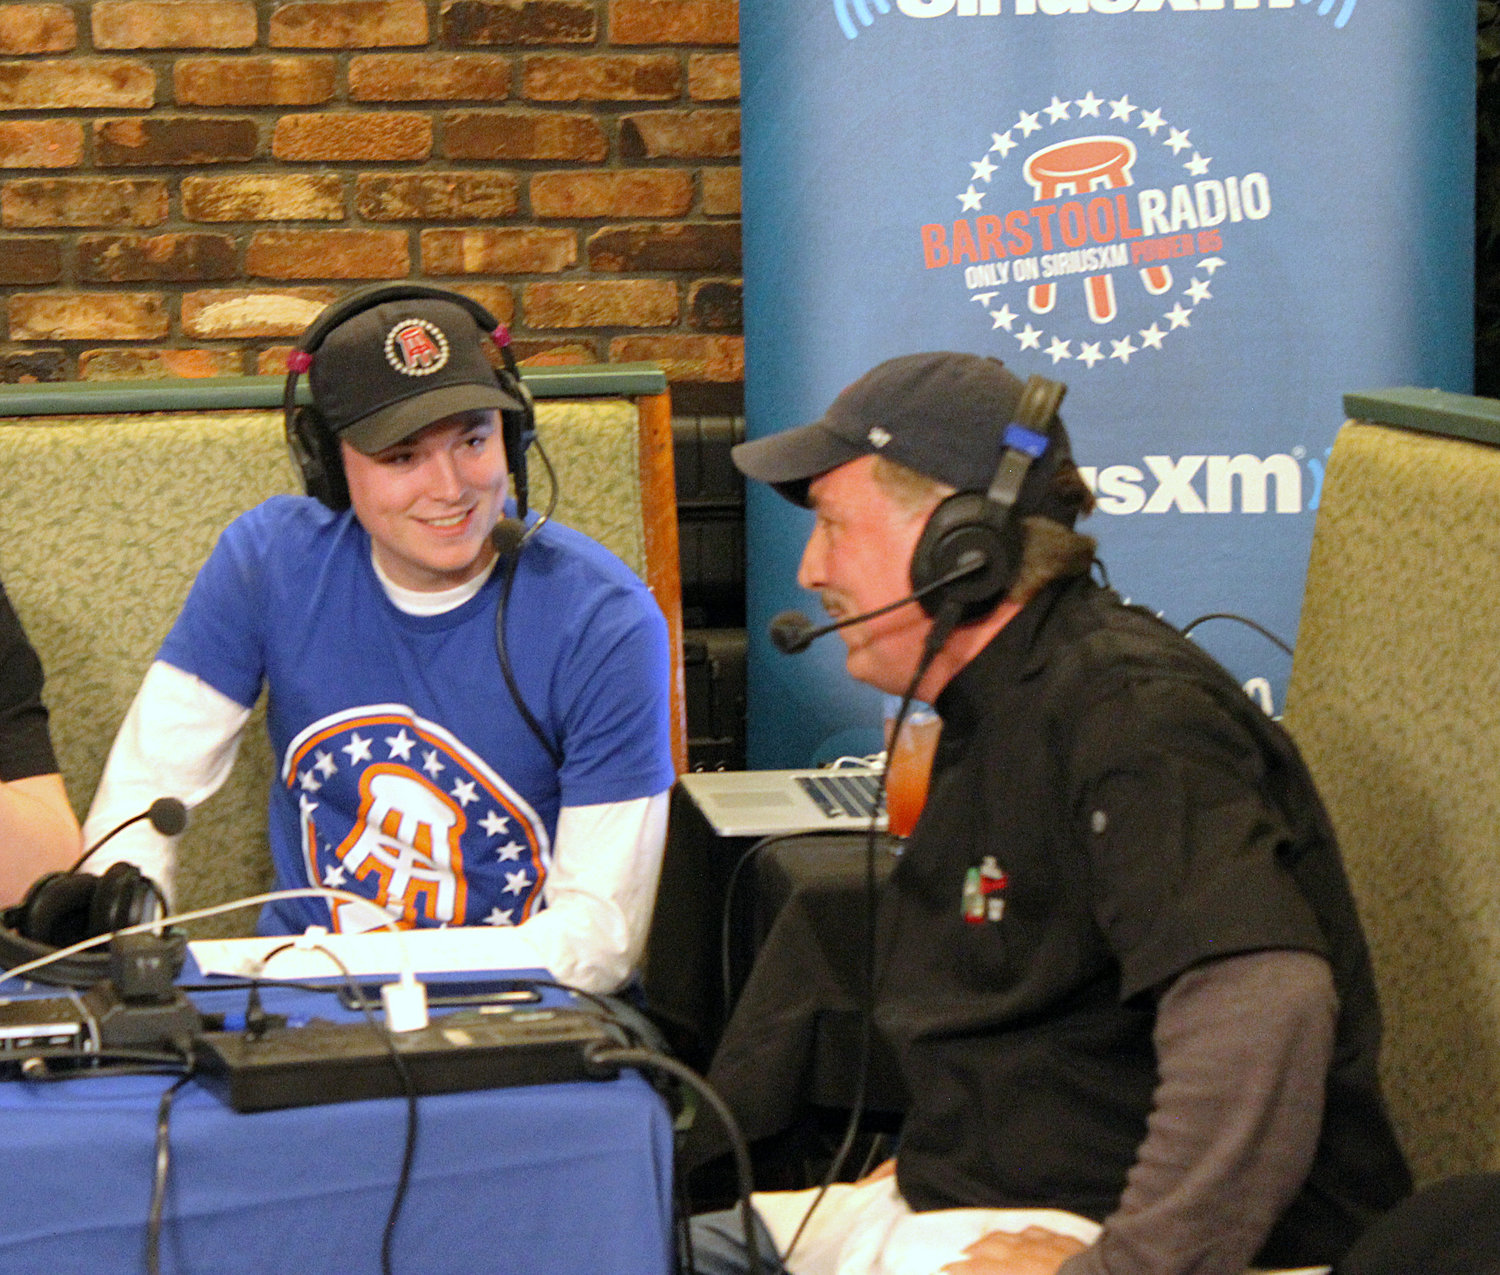 Barstool Sports broadcast an episode on SiriusXM, live from Borrelli’s Italian Restaurant in East Meadow, on March 19. One of its hosts, Frankie Borrelli, 25, of East Meadow, left, shared jokes about the family with his father, Frank Borrelli Jr.